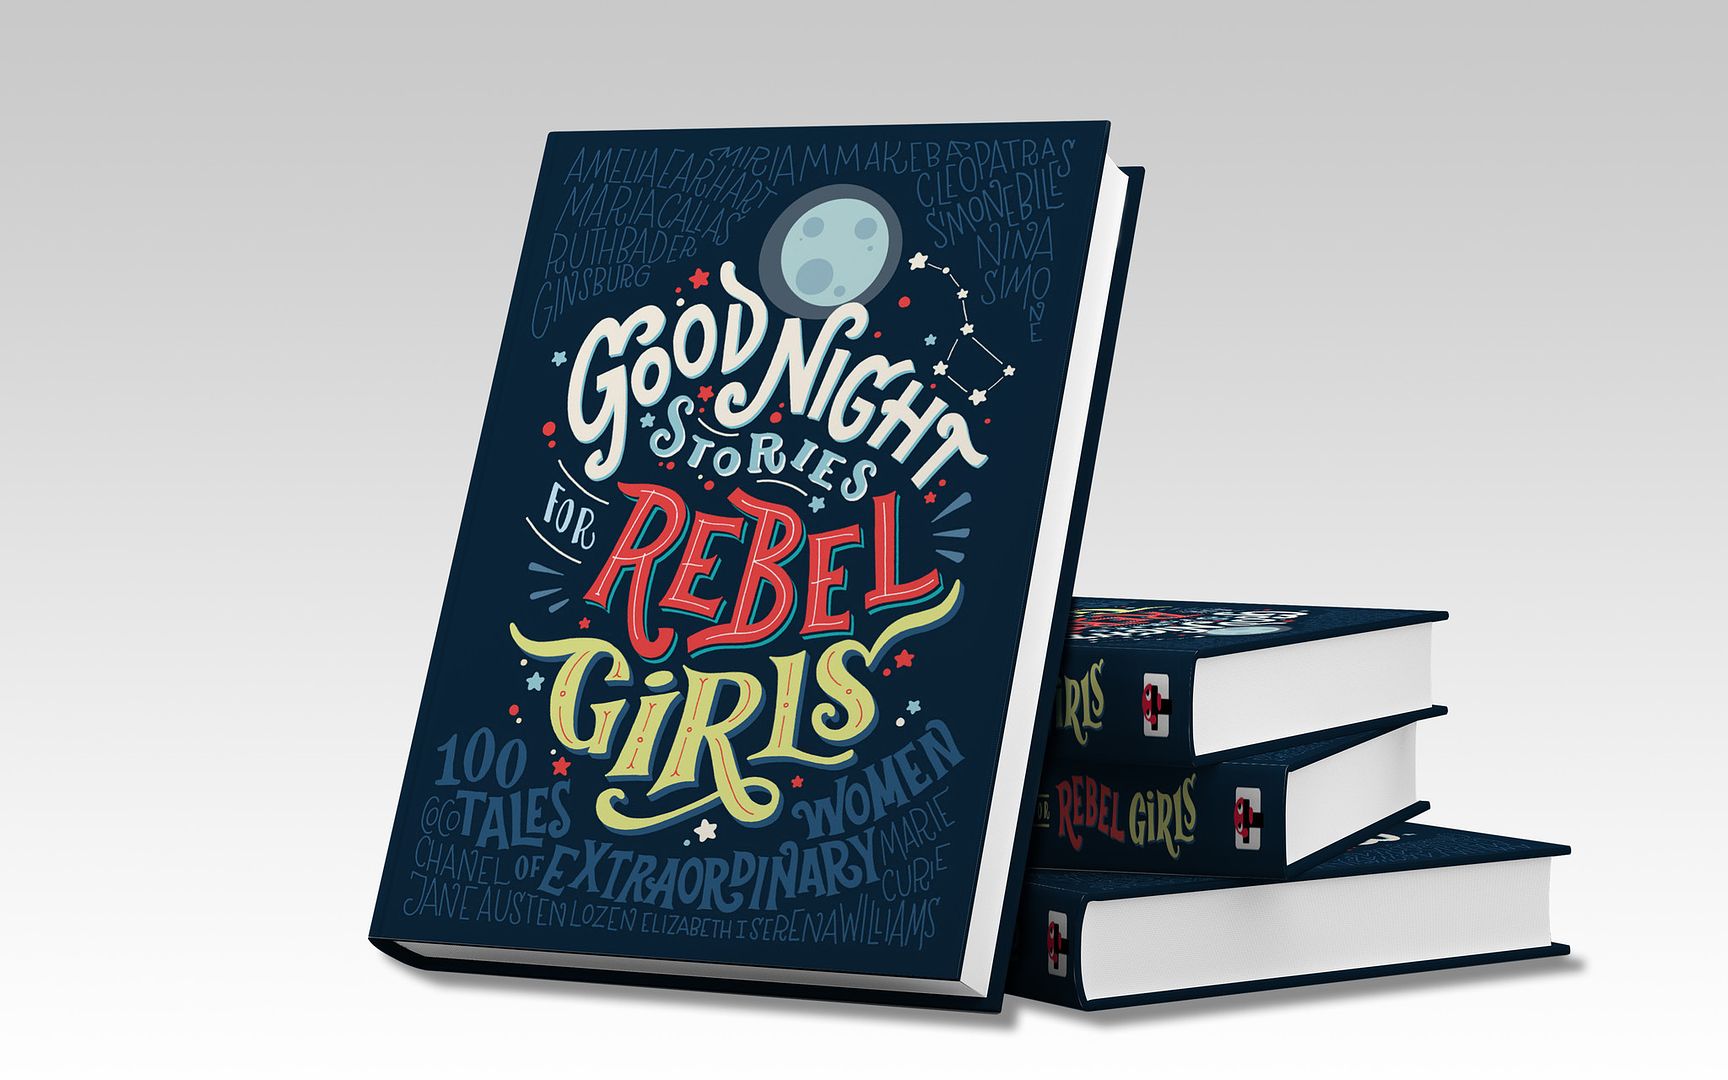 Good Night Stories for Rebel Girls: One of the best books for children (or adults, really) of 2016